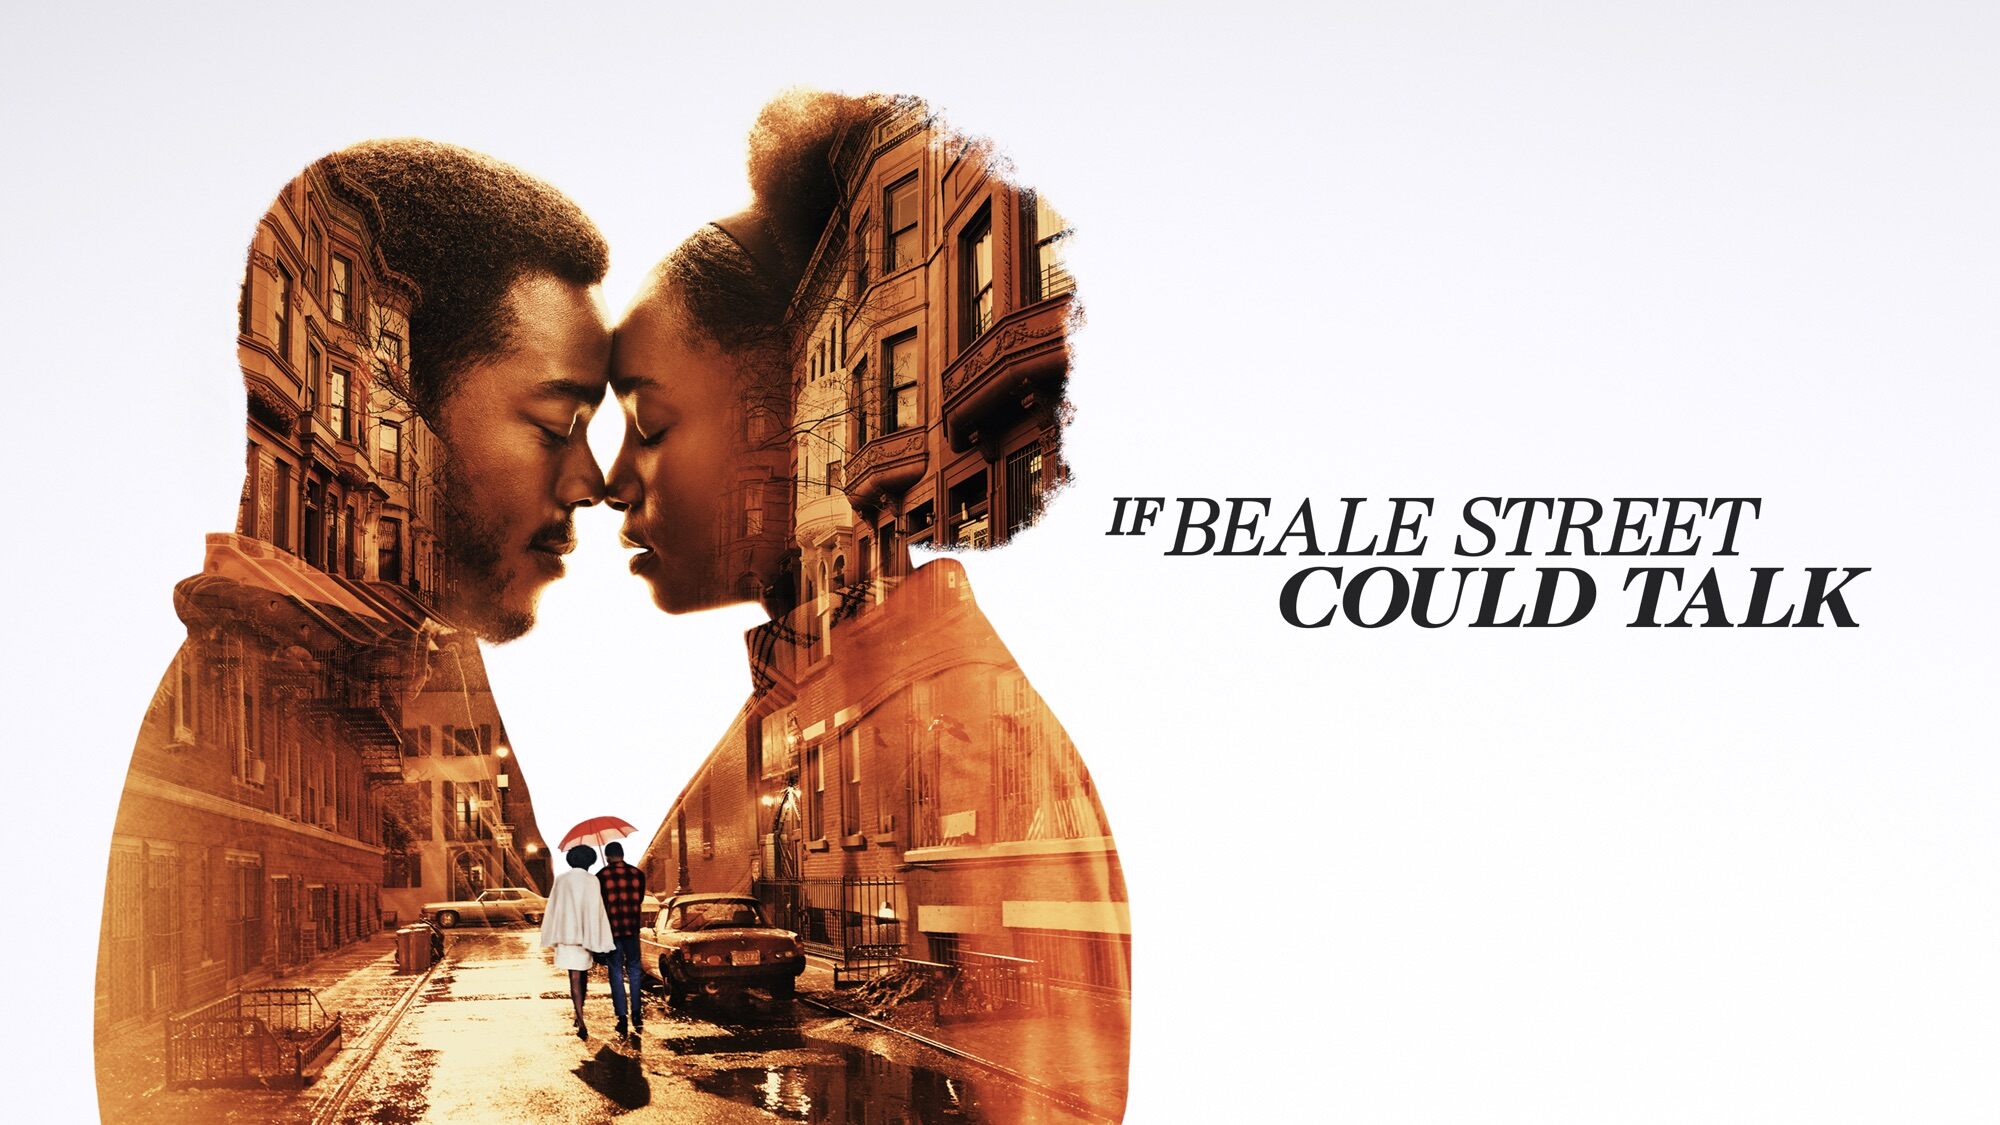 37-facts-about-the-movie-if-beale-street-could-talk